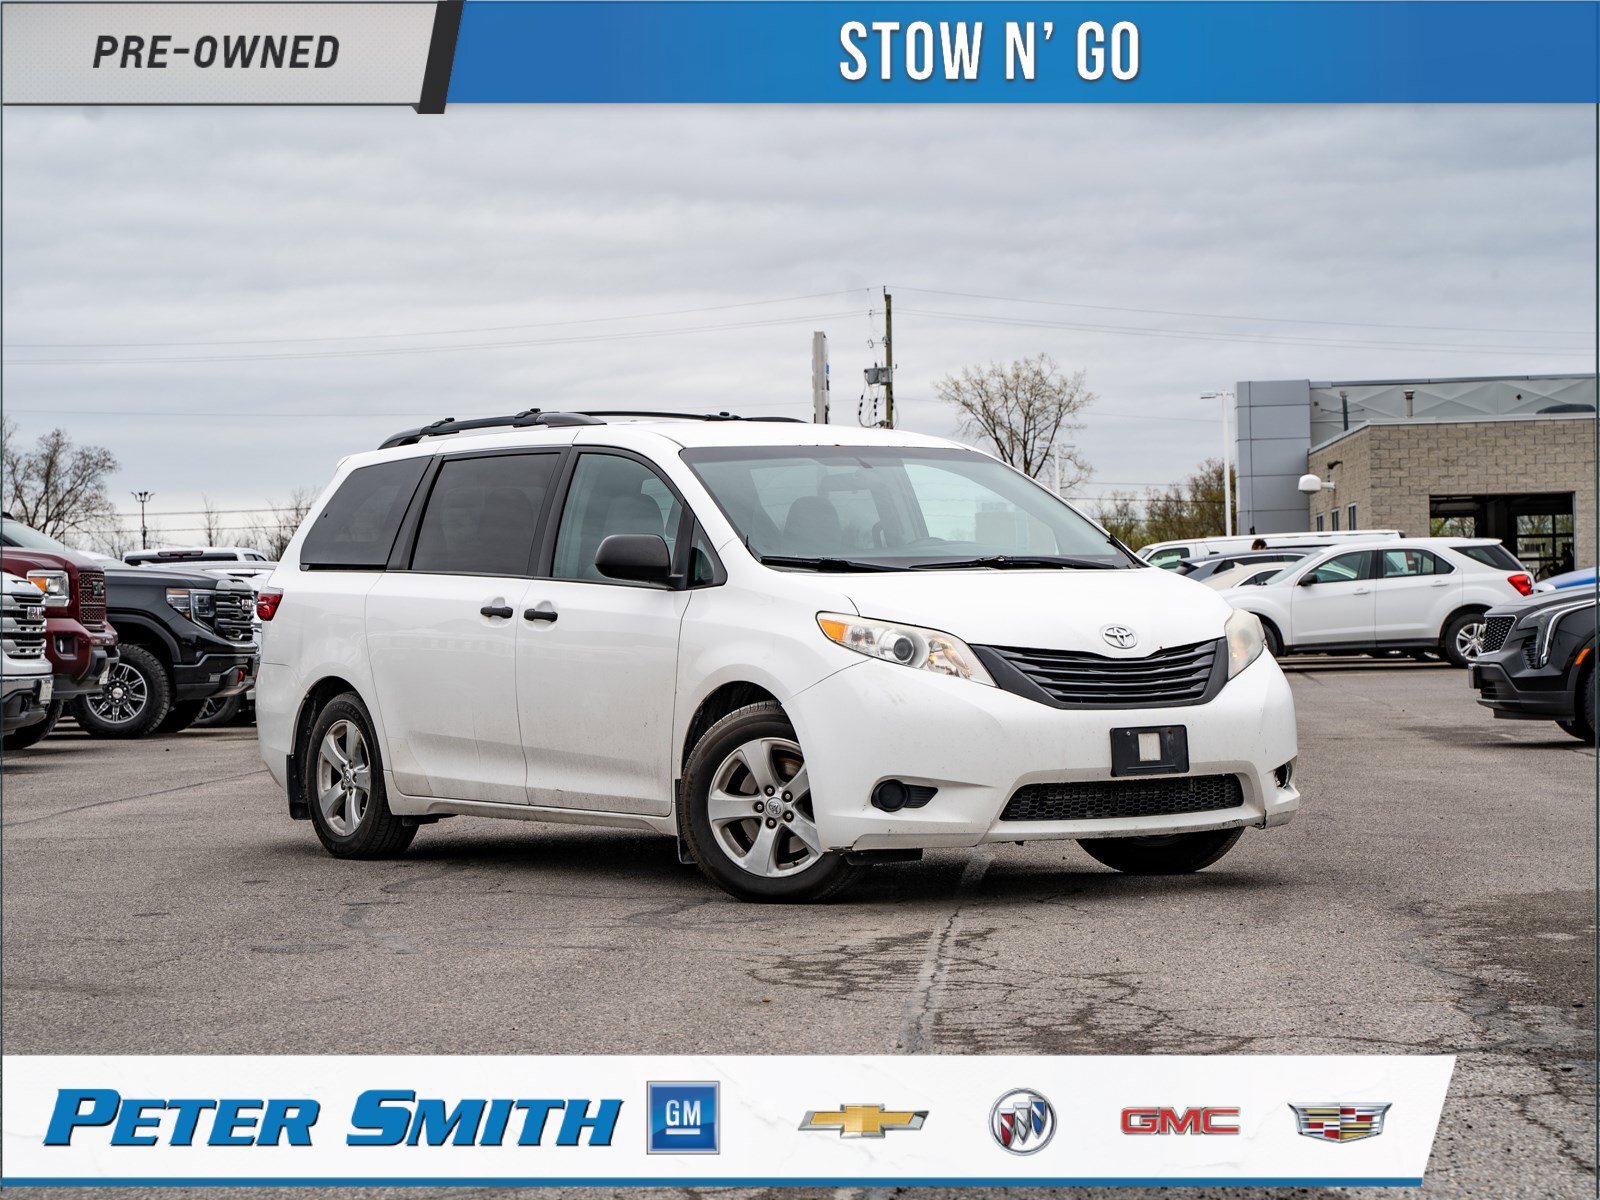 2015 Toyota Sienna L - 3rd Row Seating | 2nd Set of Tires